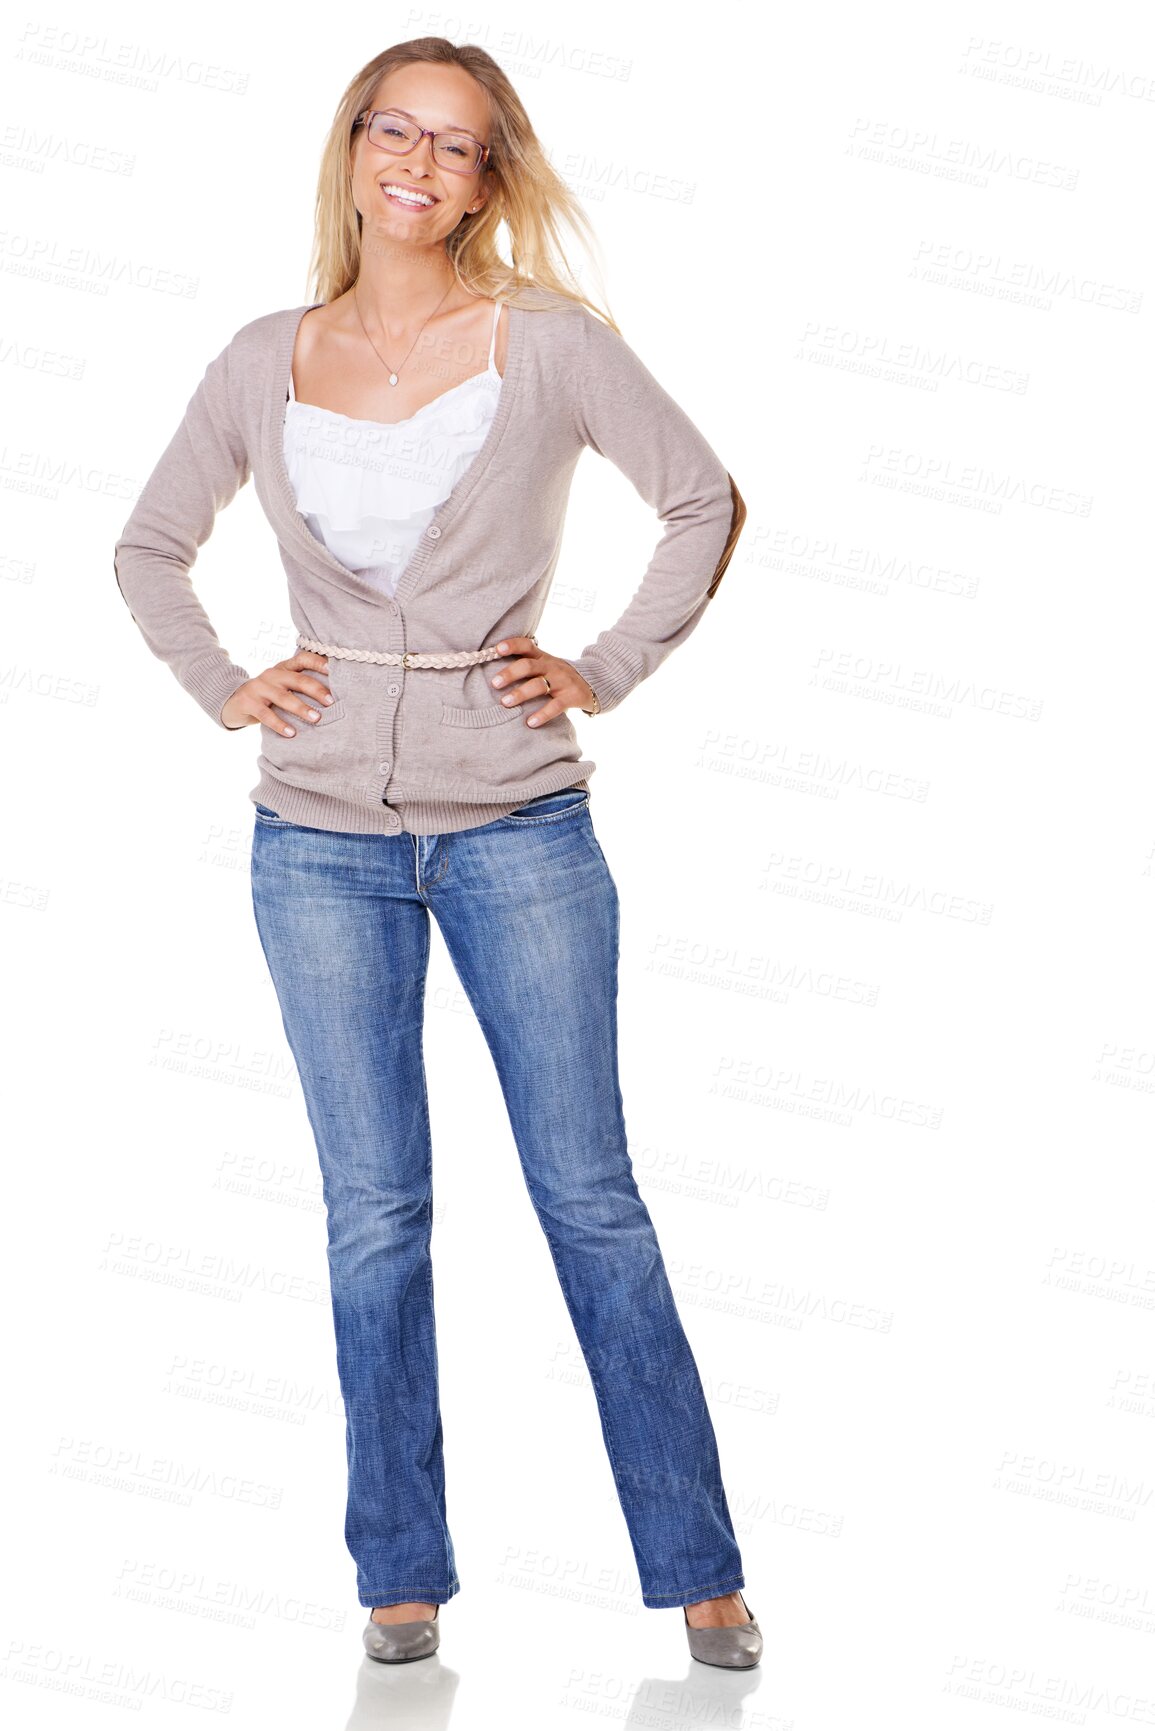 Young And Alluring Girl Striking A Pose With Hand On Waist Photo Background  And Picture For Free Download - Pngtree